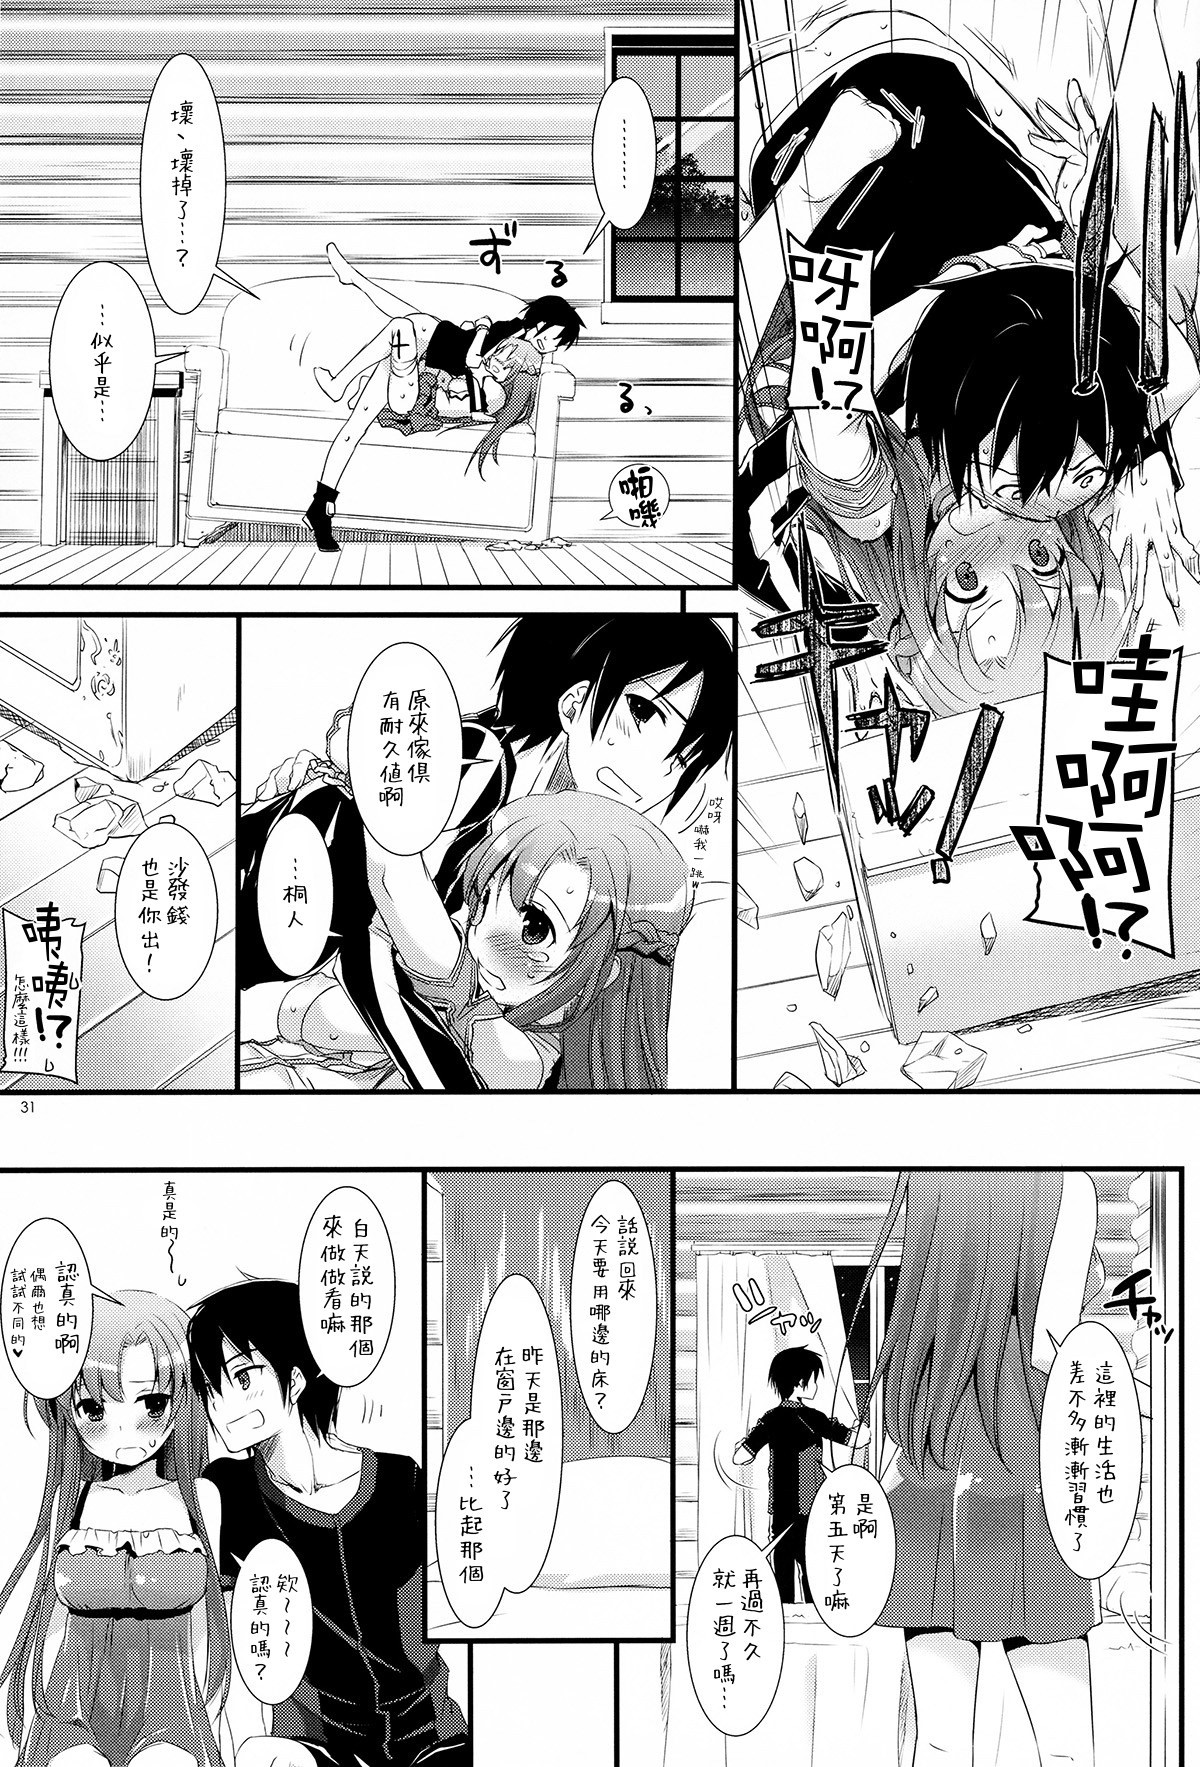 D.L. Action 71 hentai manga picture 30